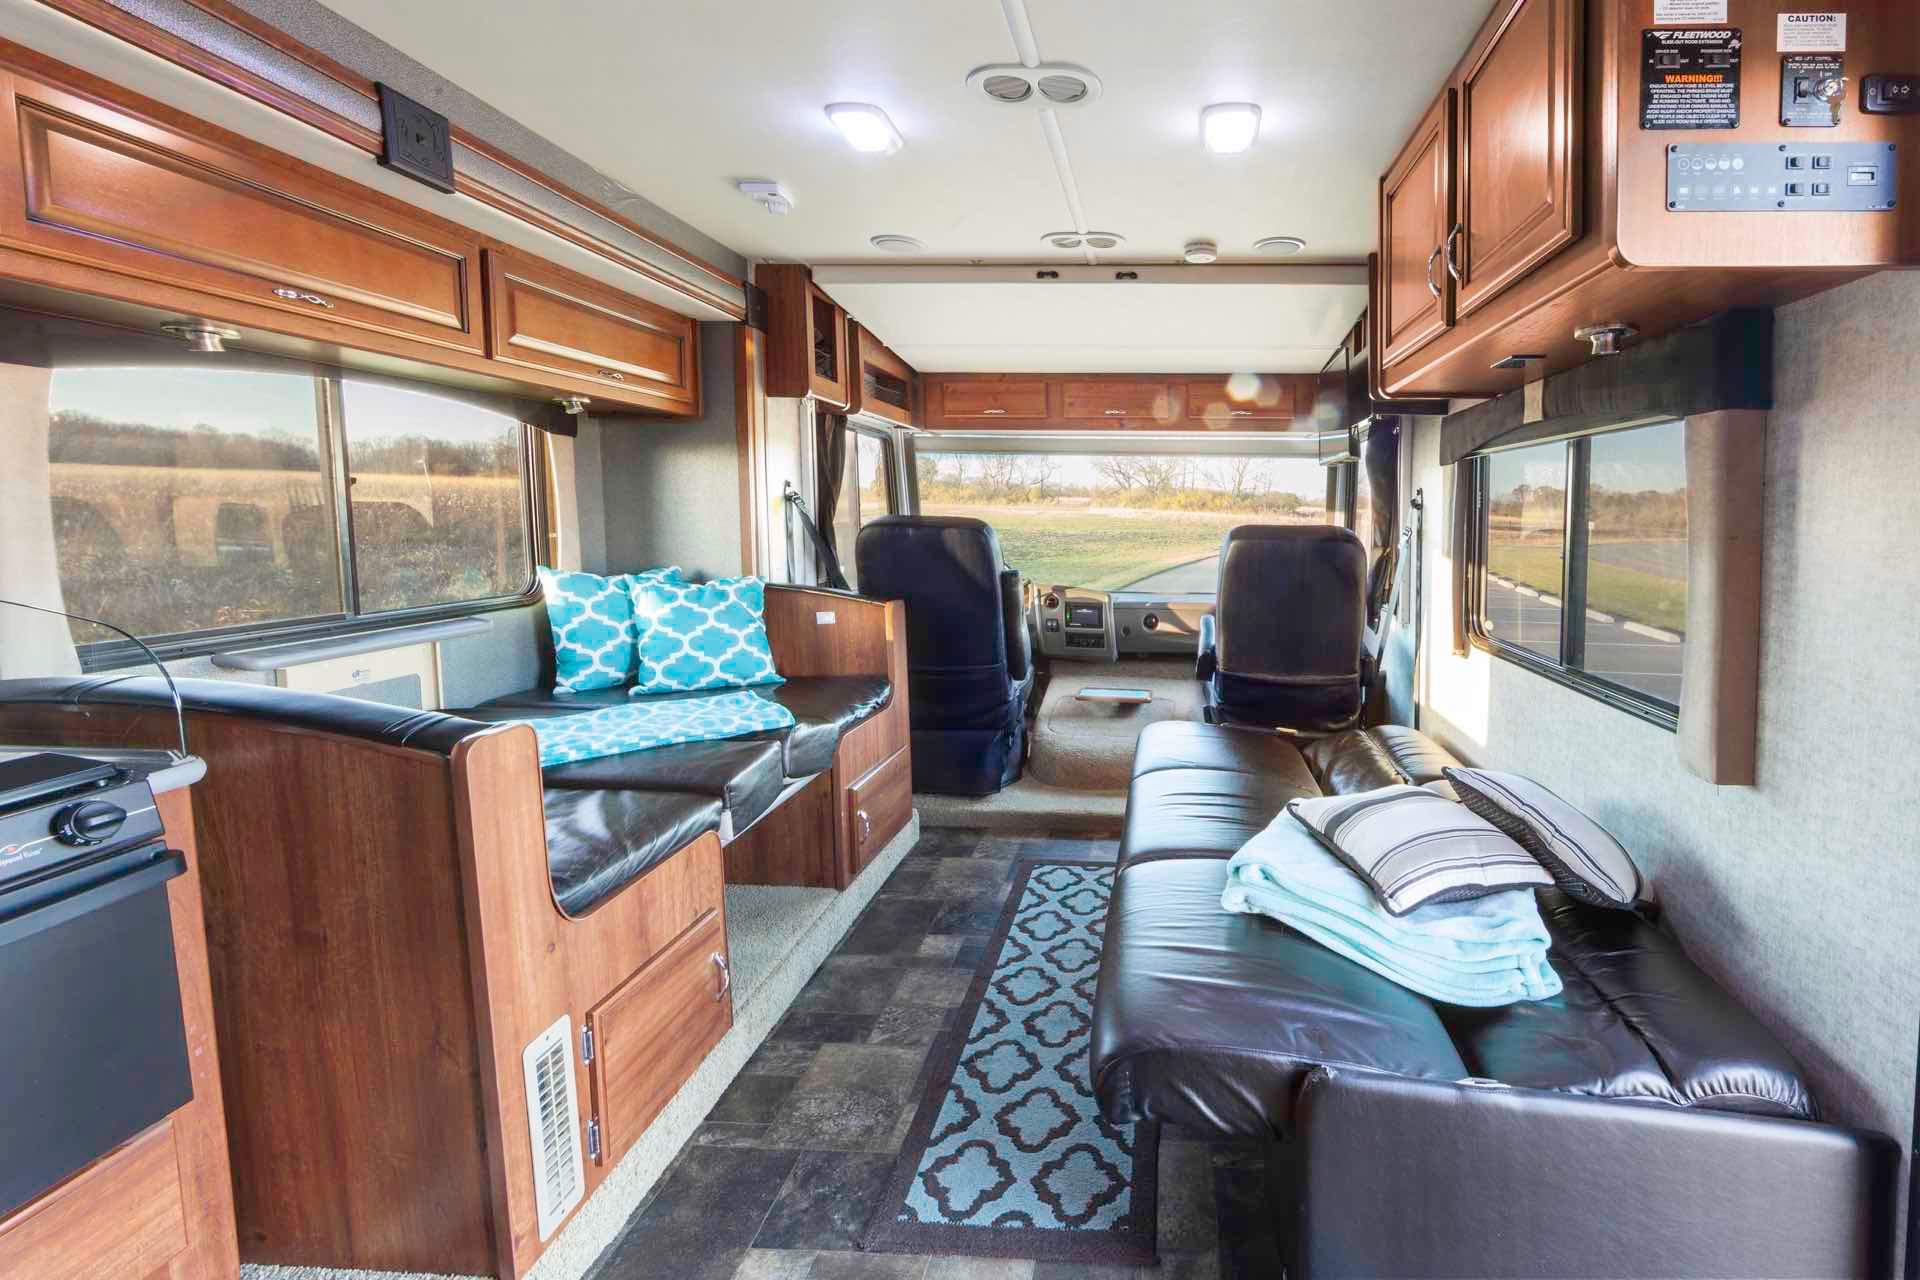 How to Take Photos That’ll Make Every Renter Fall In Love With Your RV